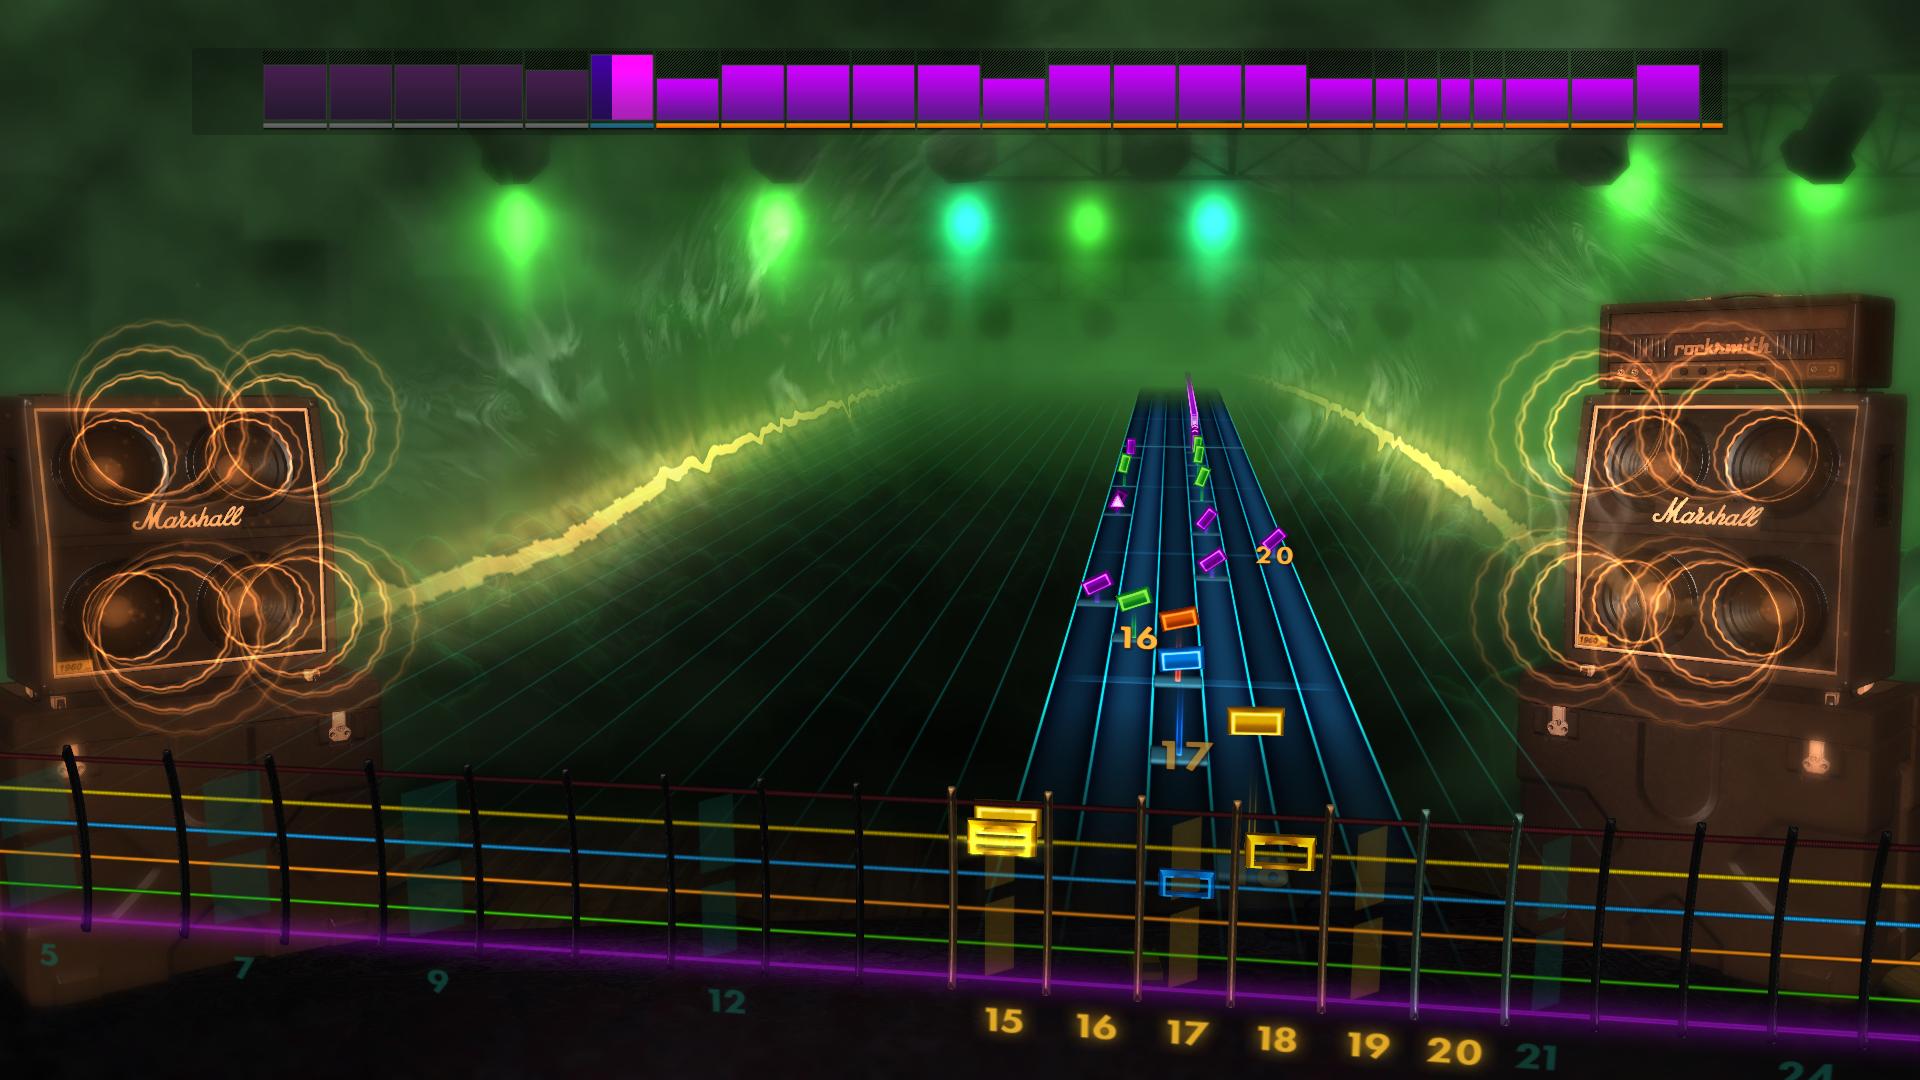 Rocksmith® 2014 Edition – Remastered – Five Finger Death Punch - “The Bleeding” Featured Screenshot #1